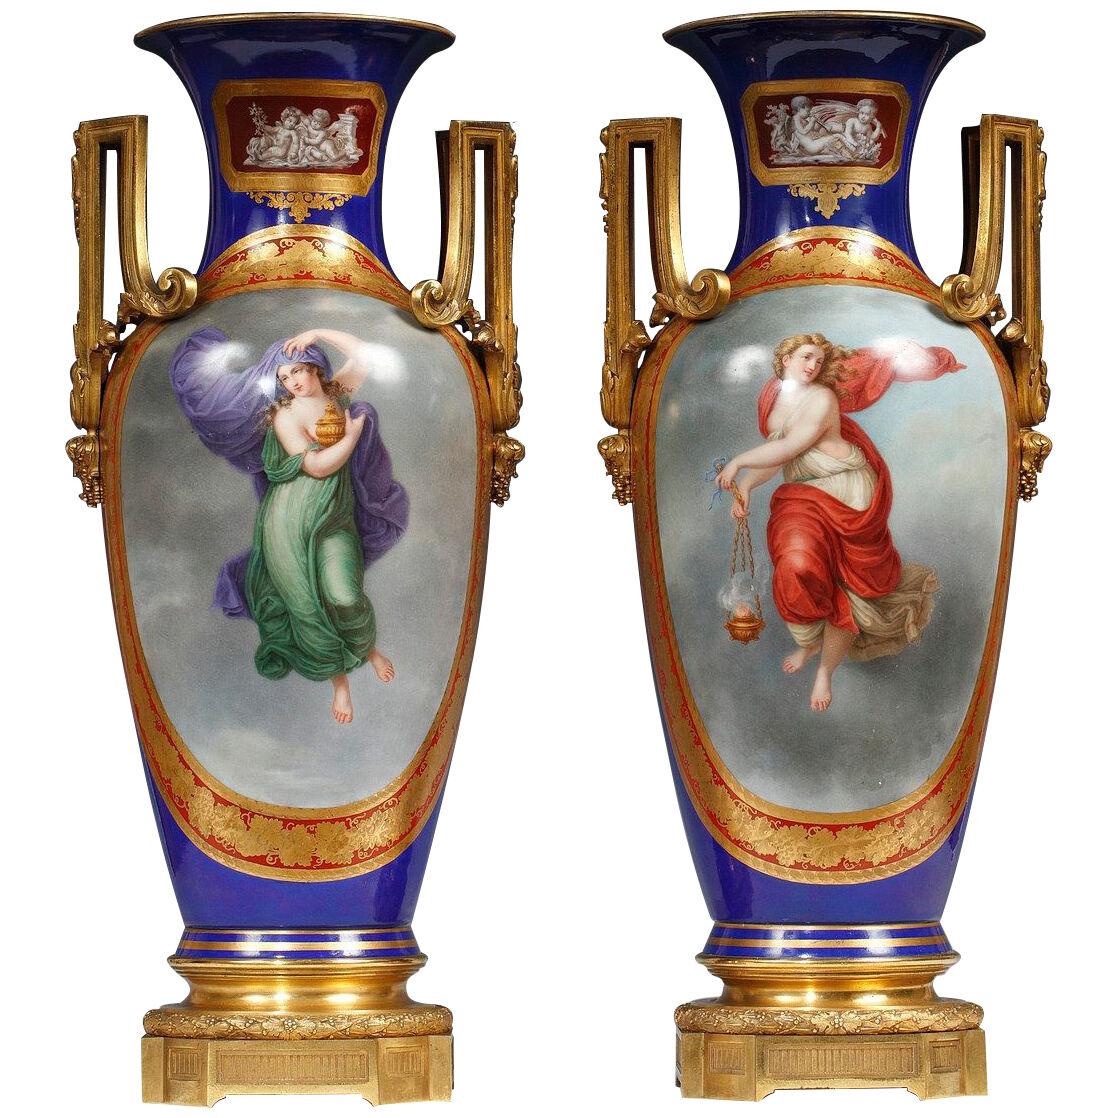 Pair of Porcelain Vases Attributed to the Manufacture of Berlin, Germany, 19th C